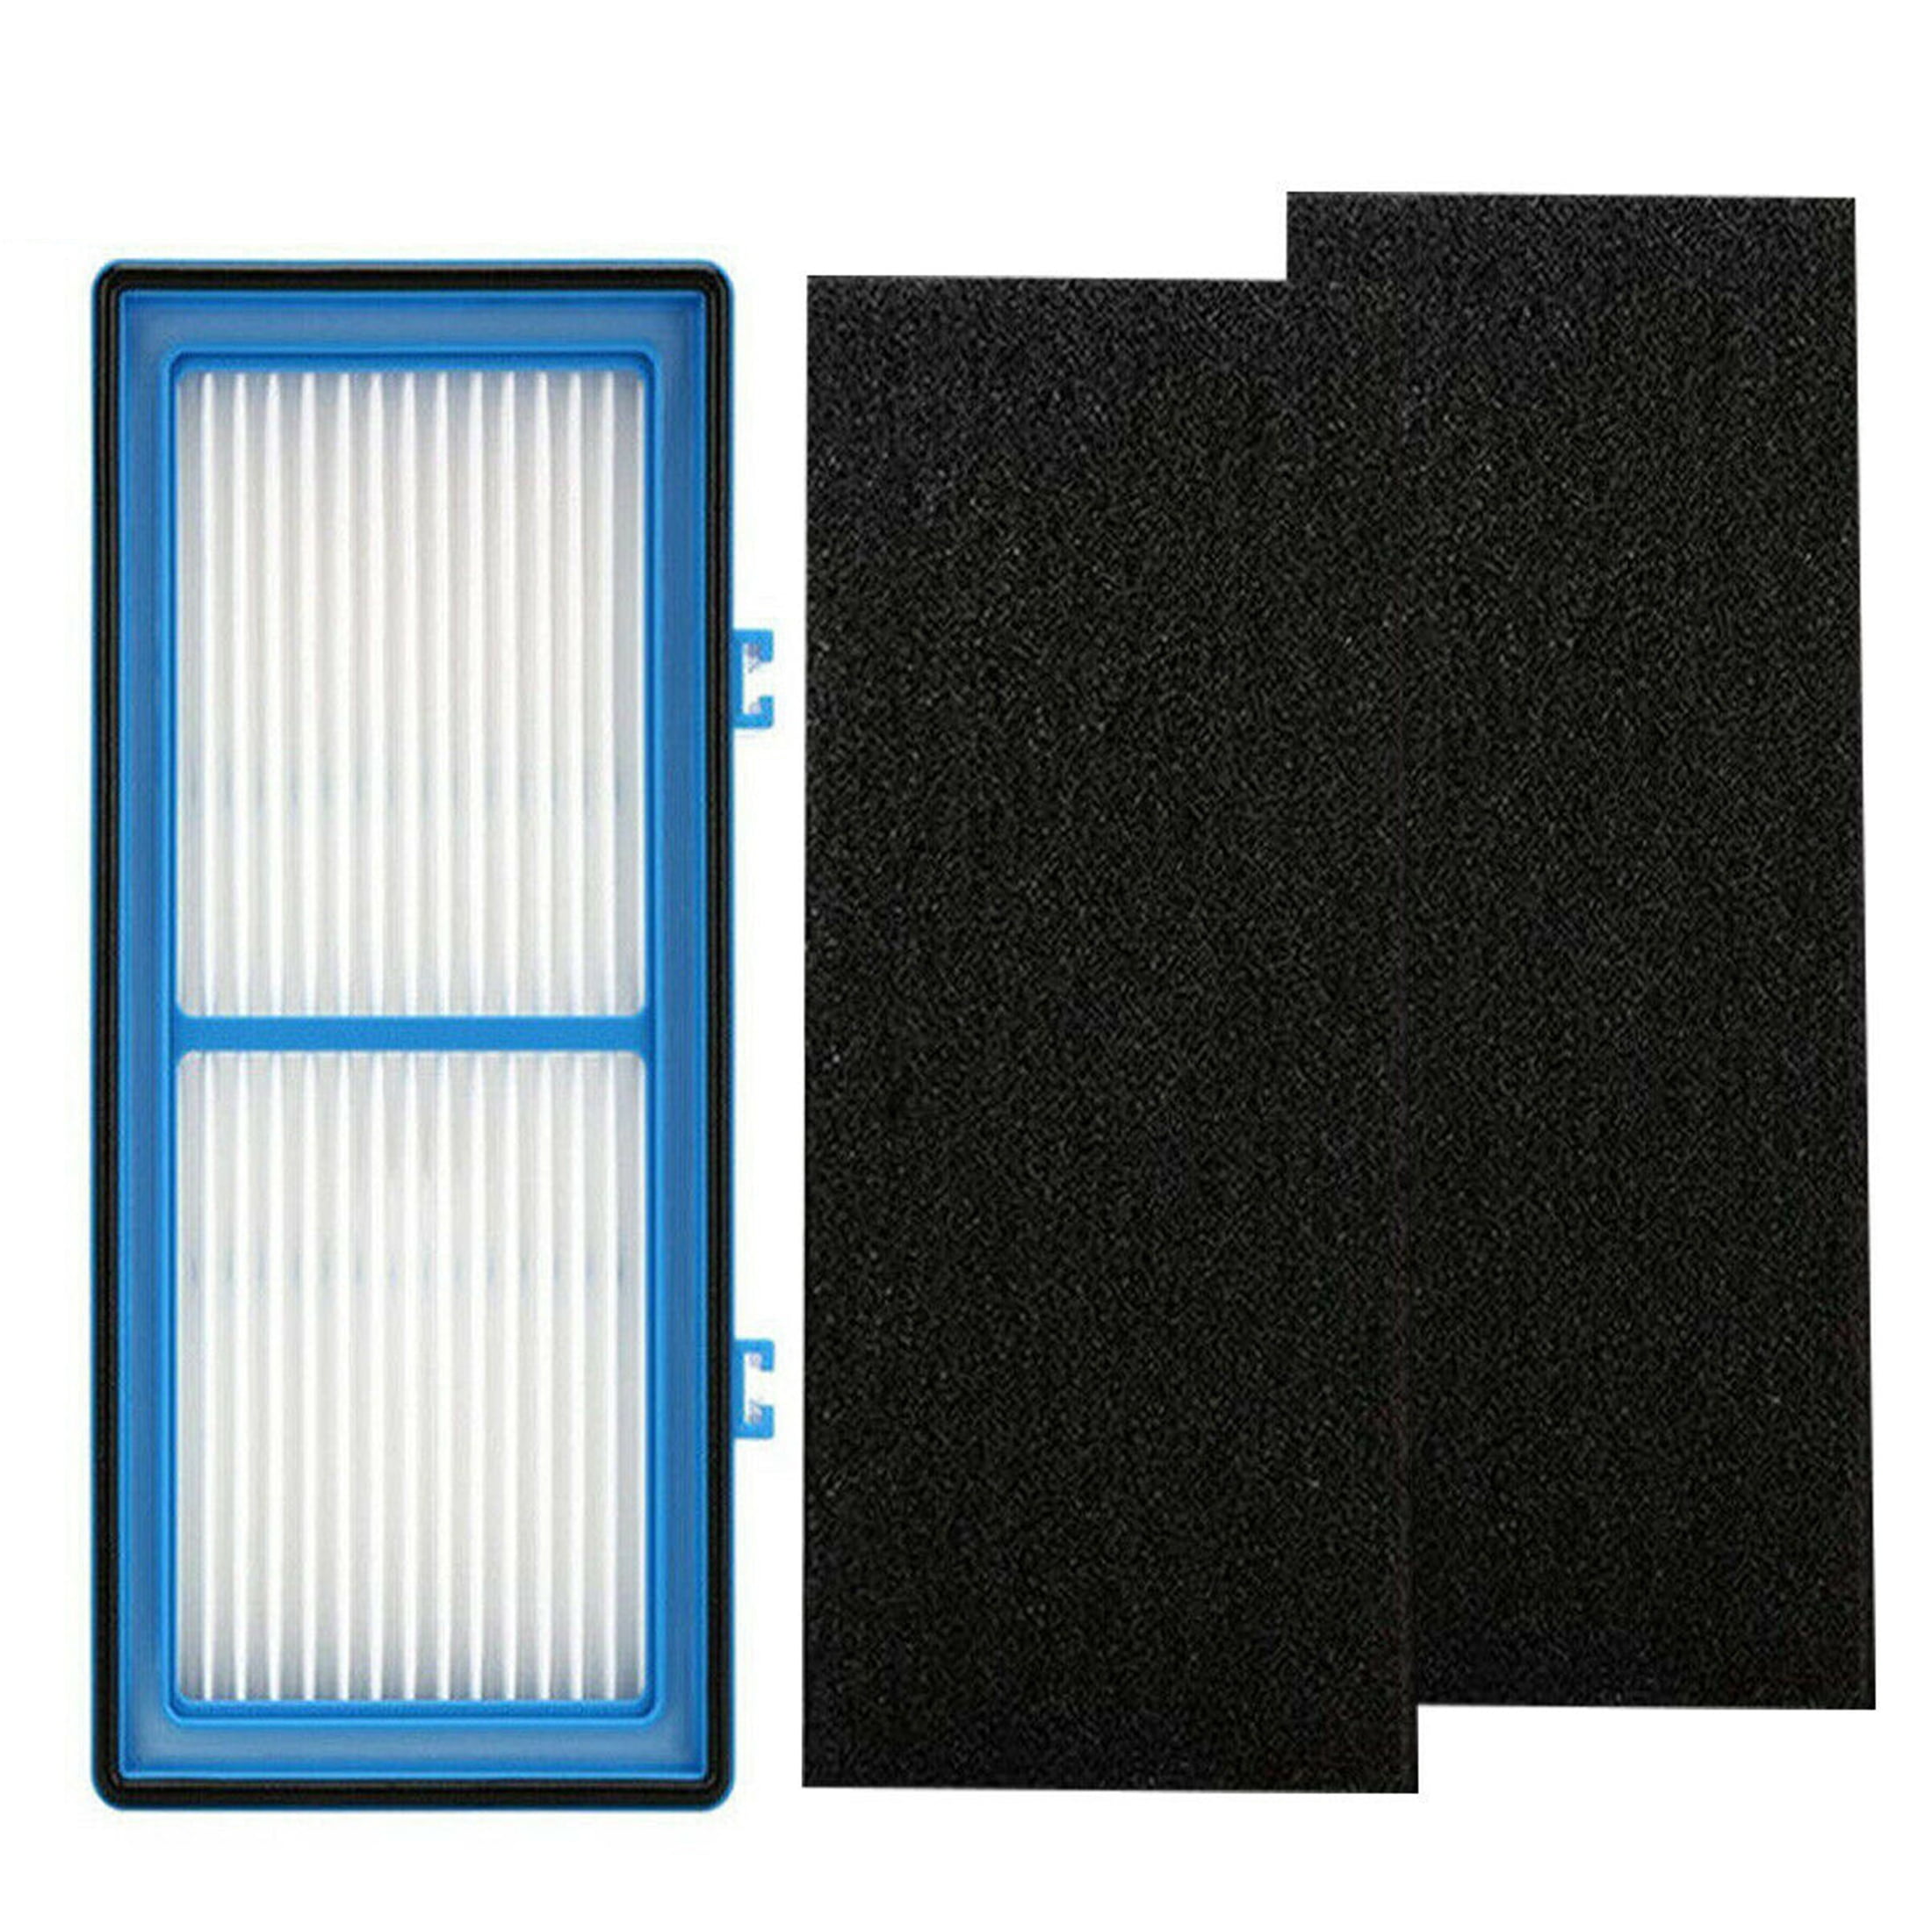 Details about   HEPA Filter 2 Pre-filter For Holmes AER1 Total Air HAPF30AT Purifier HAP242-NUC 